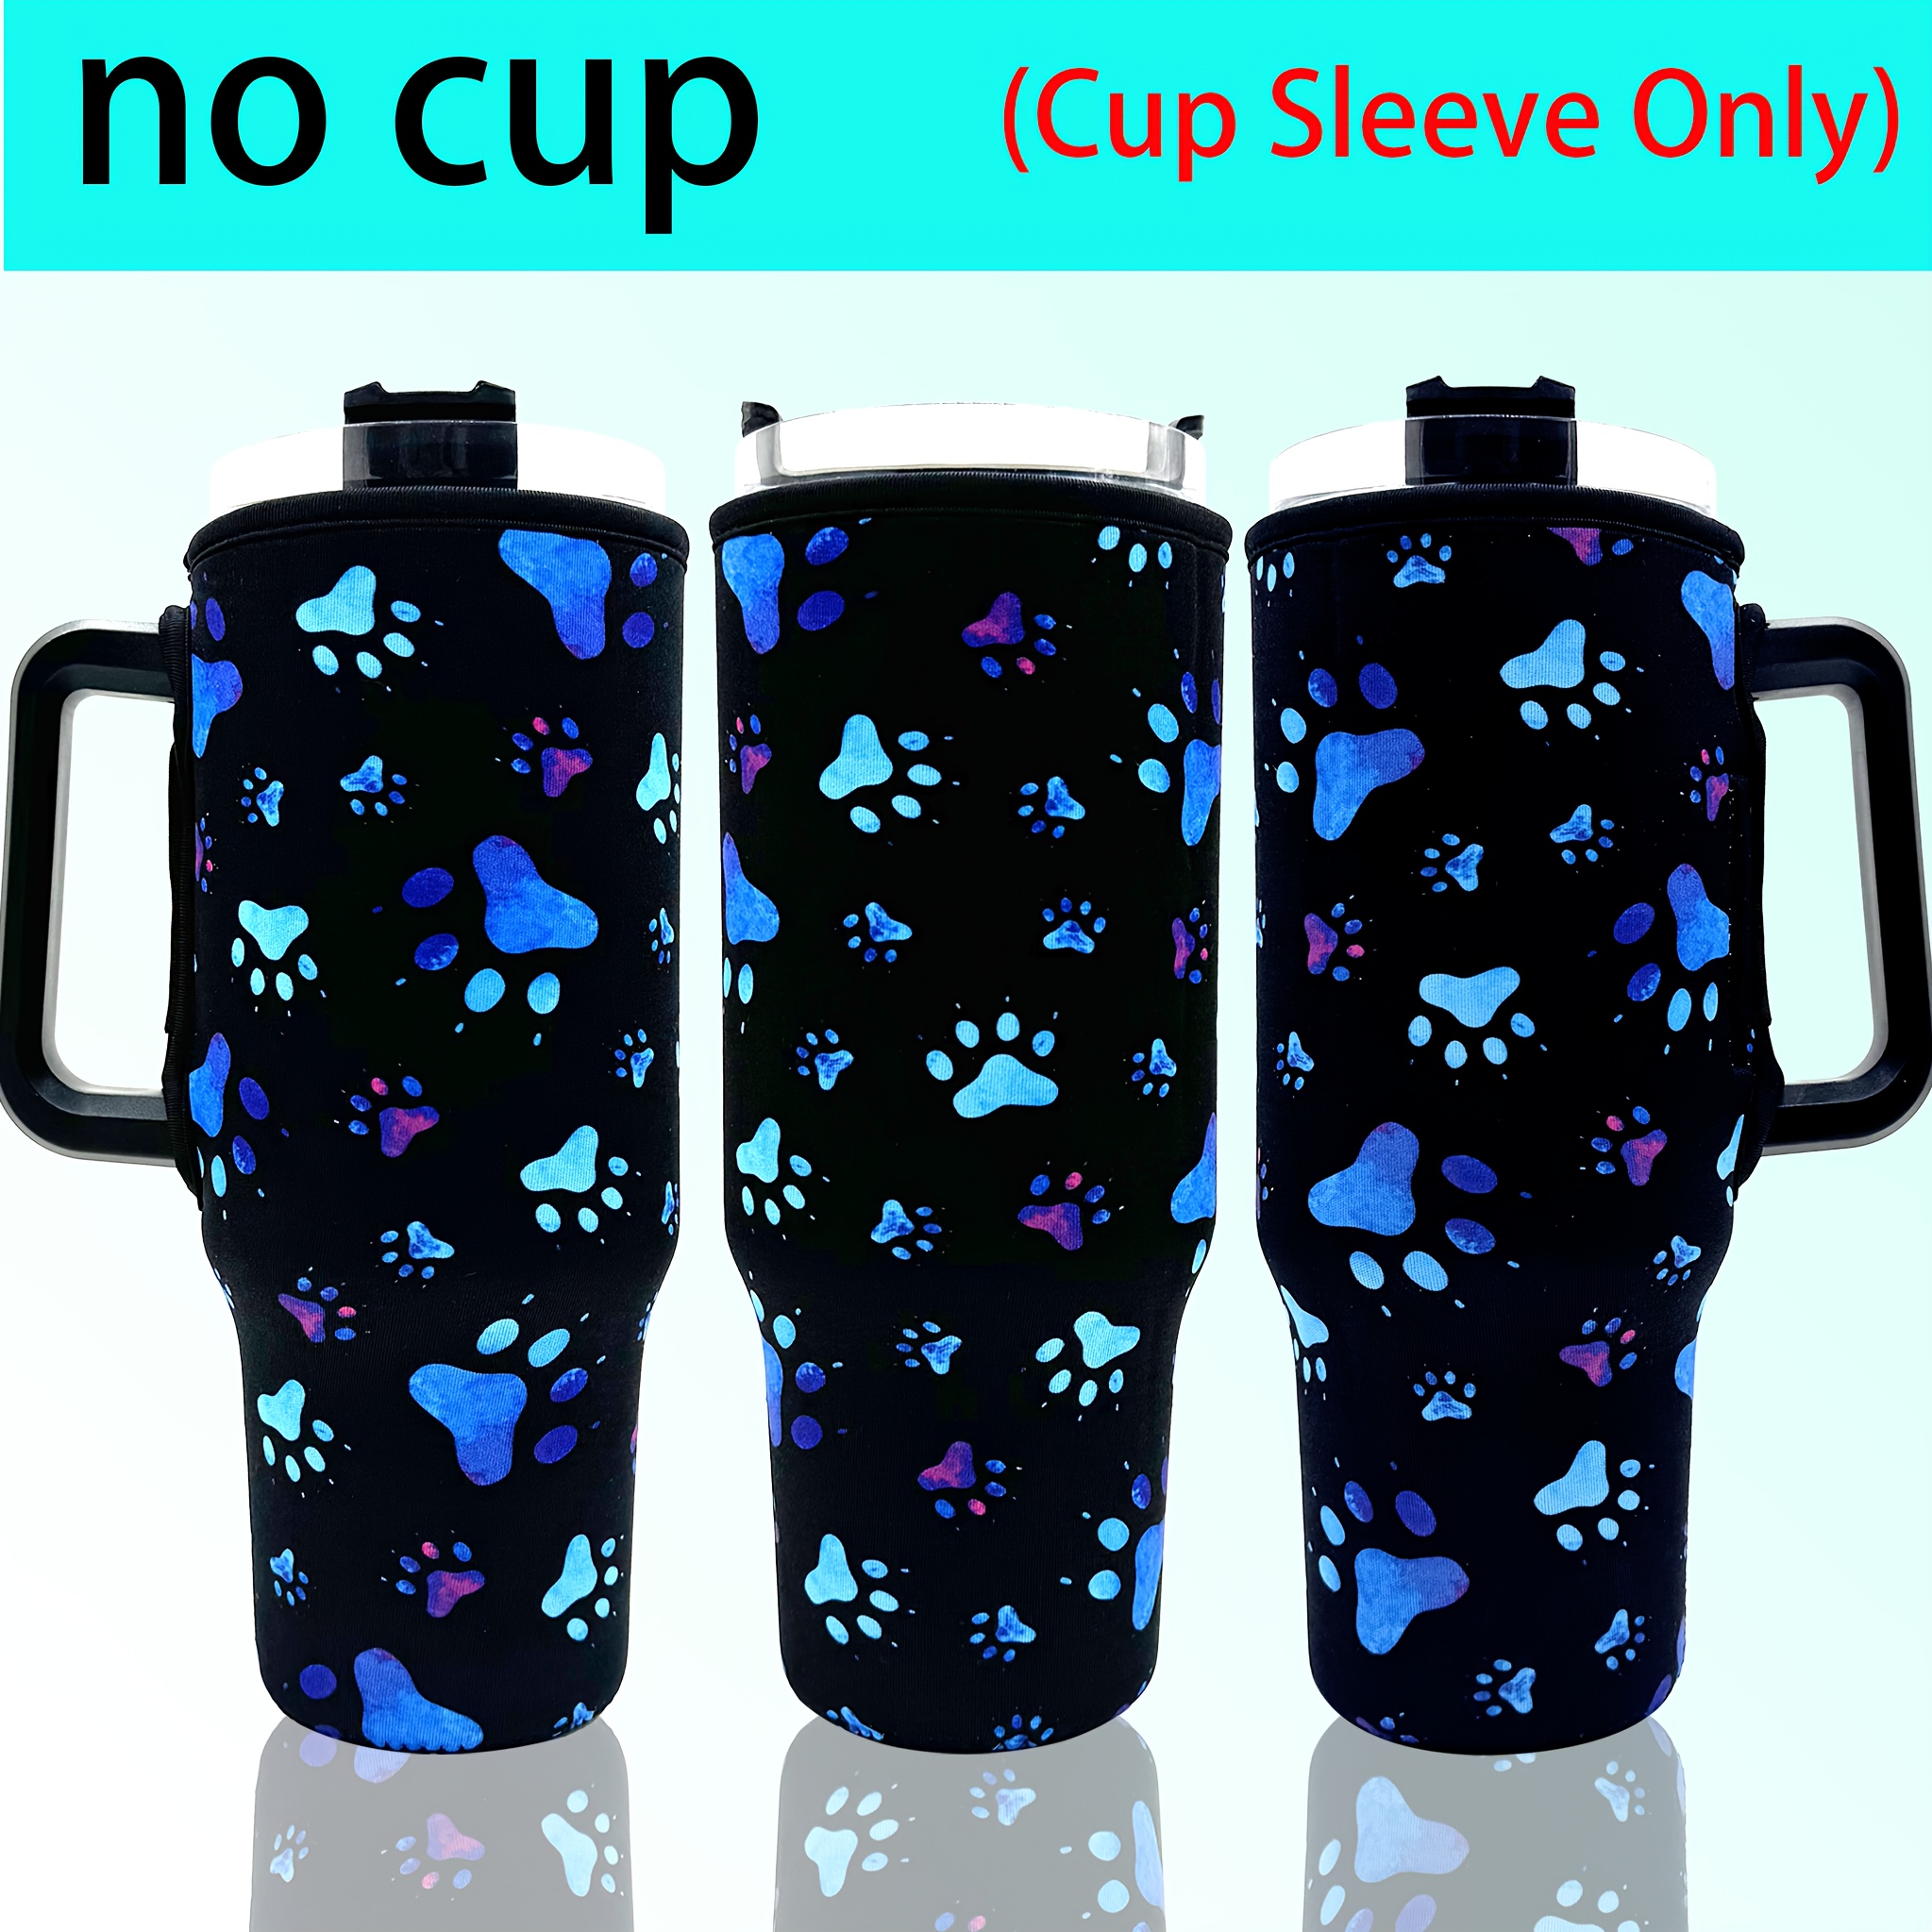 

1pc Cute Dog Paw Printed Neoprene Cup Cover - Keep Your 40oz Tumbler Cup Insulated, Non-slip & Scratch-free!